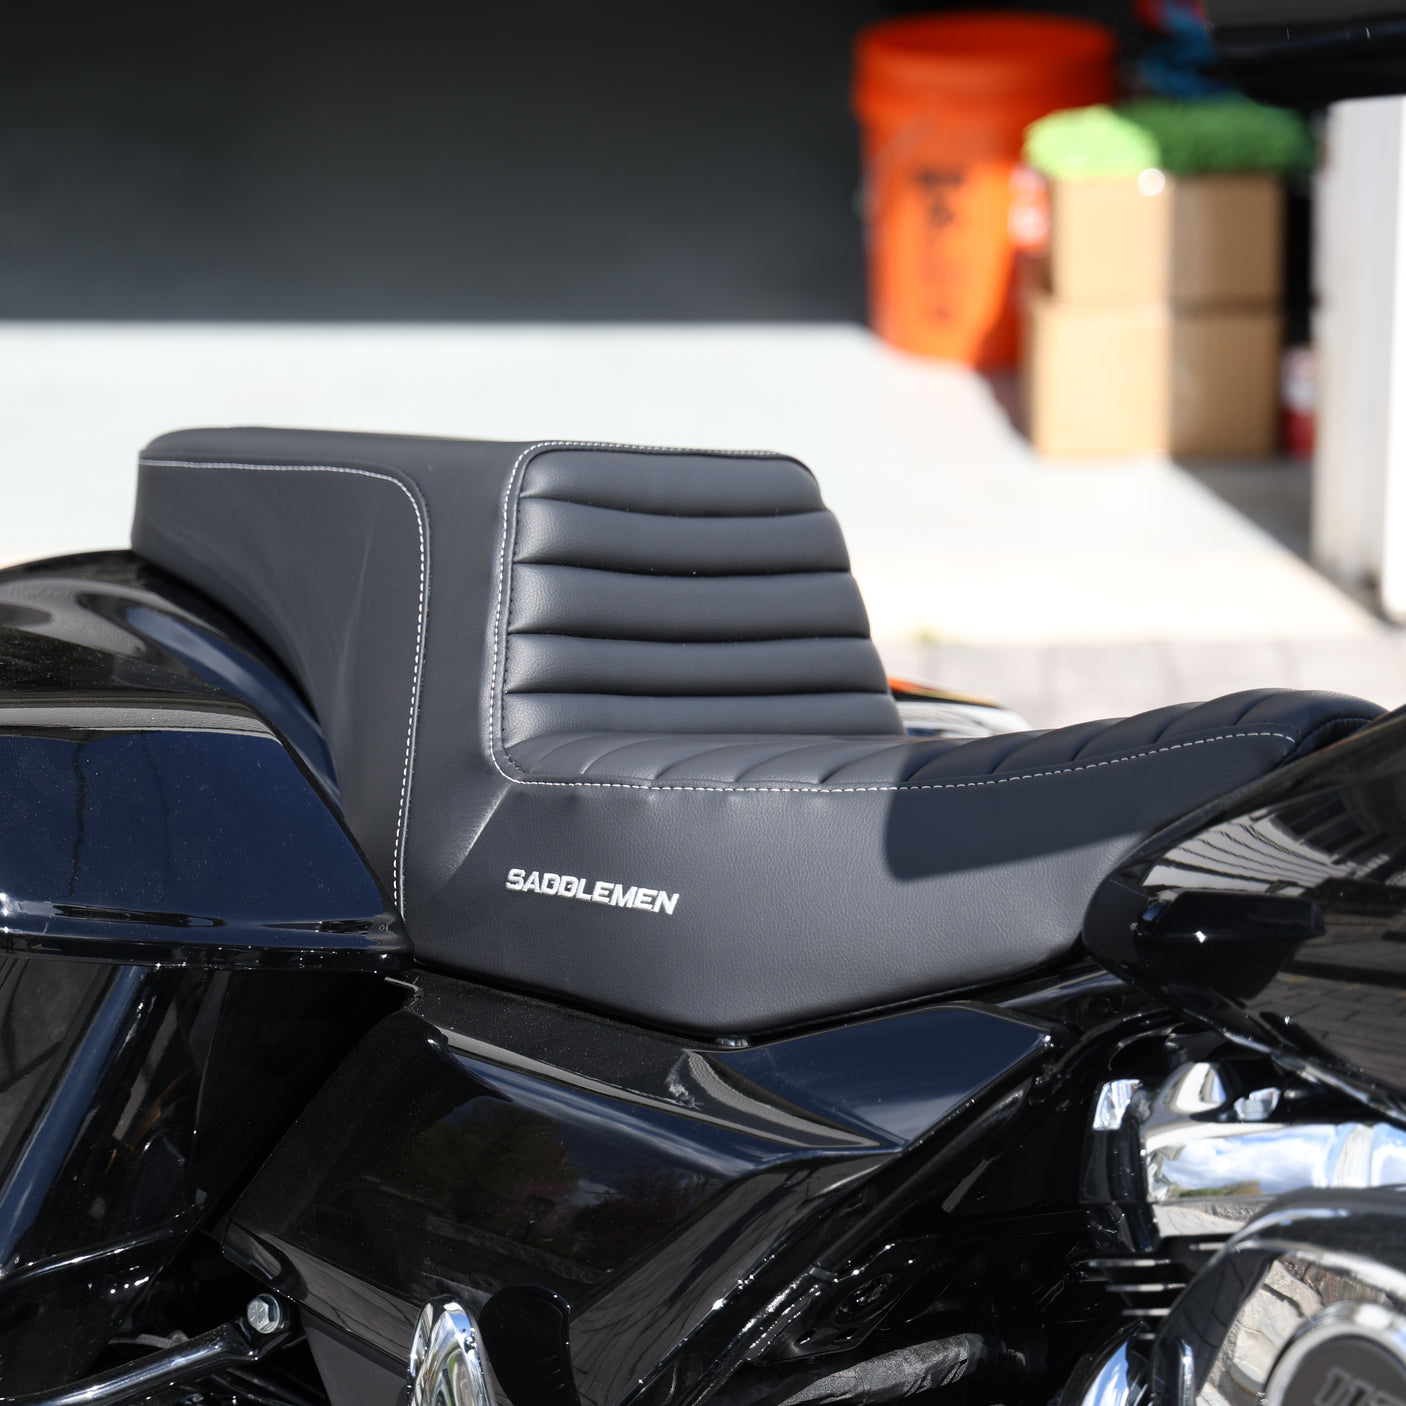 Saddlemen step up seat Tuck n roll silver stitching and logo for 2024 Touring